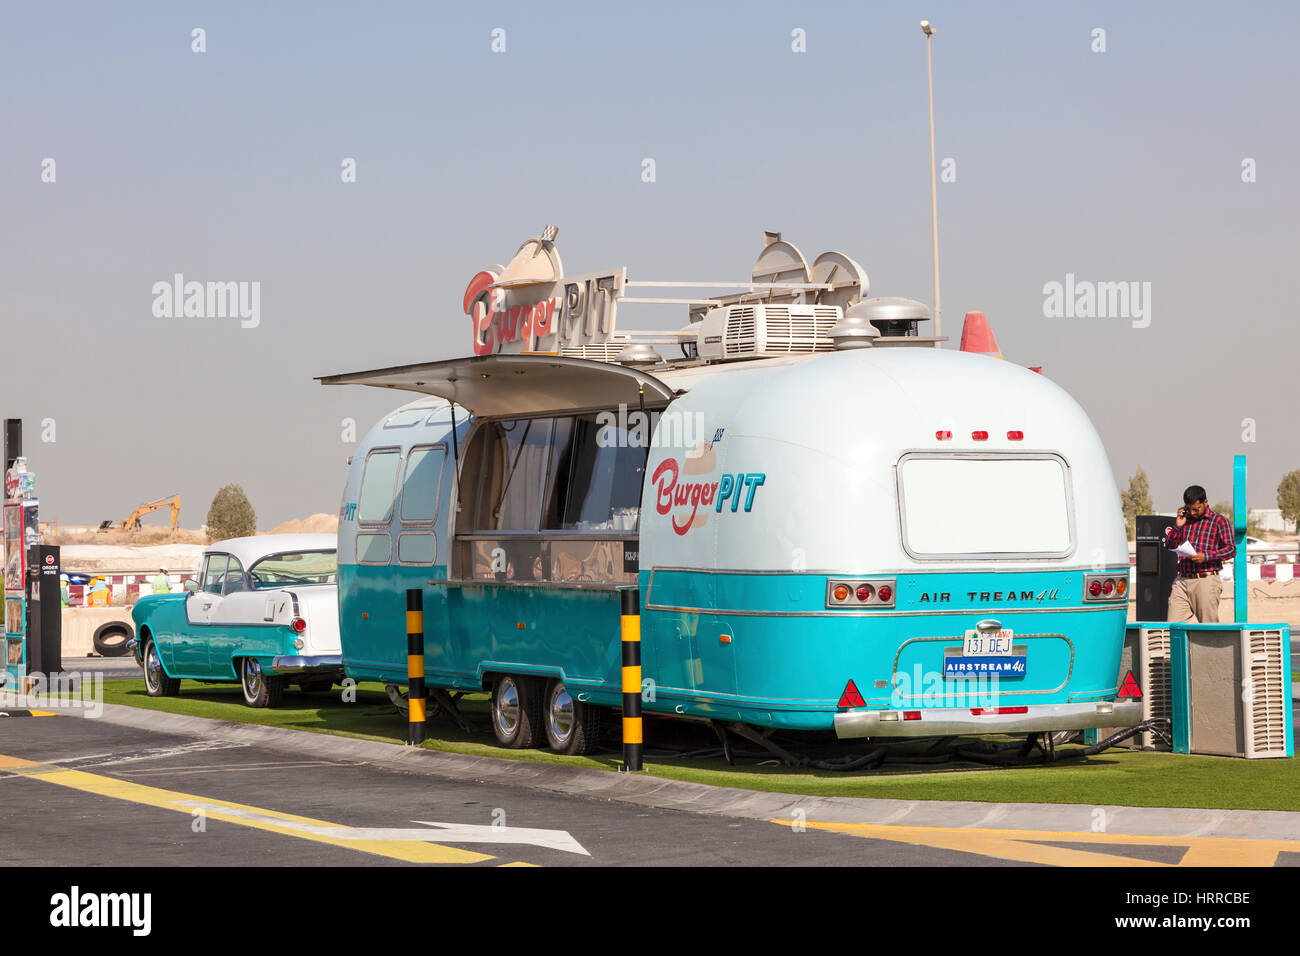 DUBAI, UAE - NOV 27, 2016: Airstream caravan converted to a food truck at the Last Exit food trucks park on the E11 highway between Abu Dhabi and Duba Stock Photo